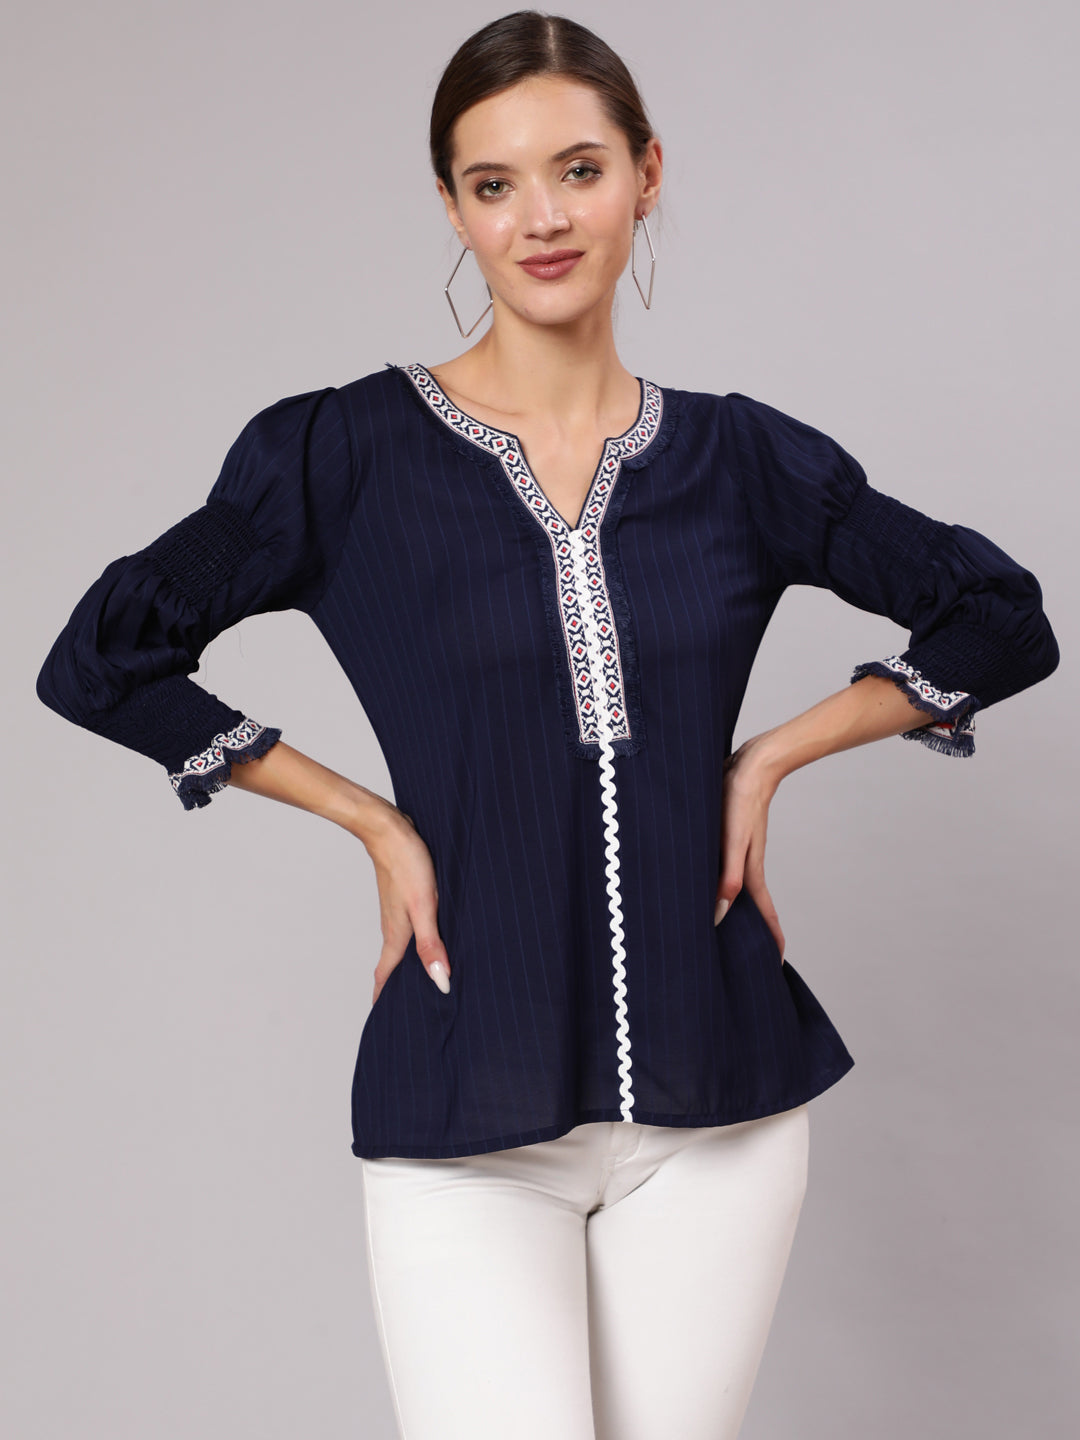 A Blue Poly Silk Lace Embellished Top With Smocked Sleeves